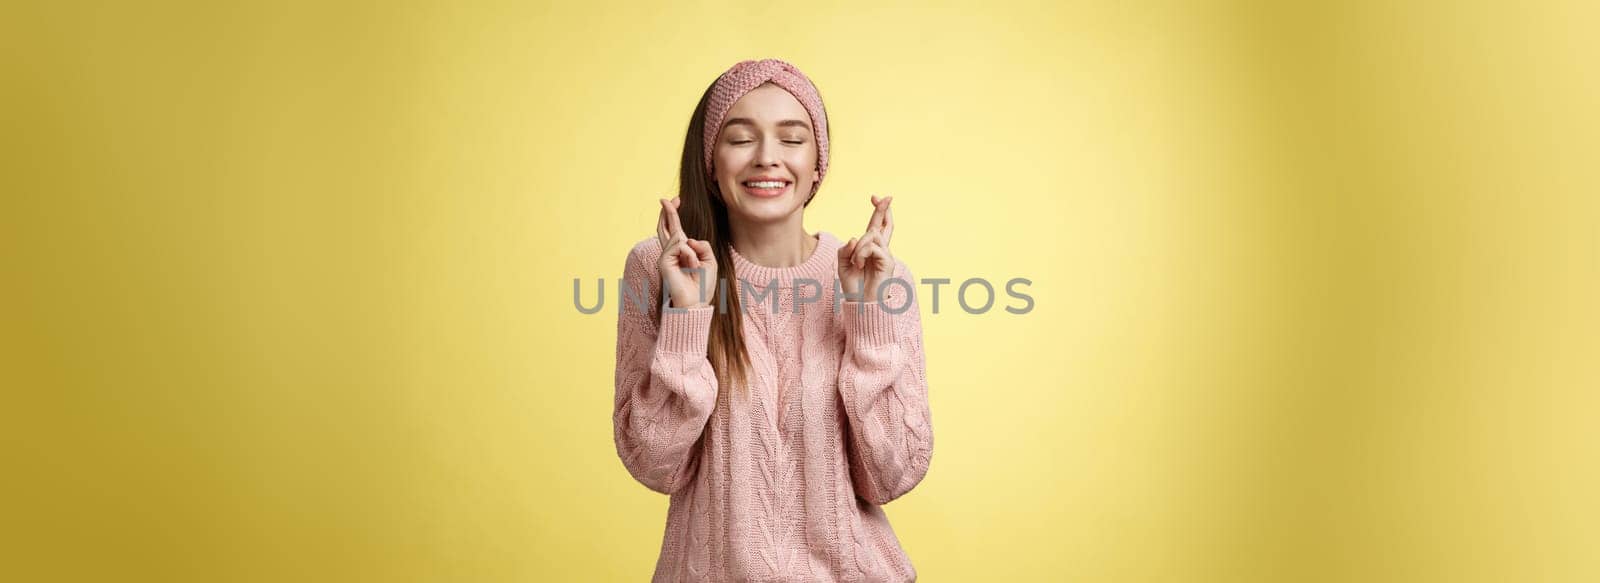 Girl wishing wellness wanting dream come true, cross fingers dreamy, close eyes waiting miracle, anticipating good news, posing excited and joyful against yellow background in knitted warm sweater.